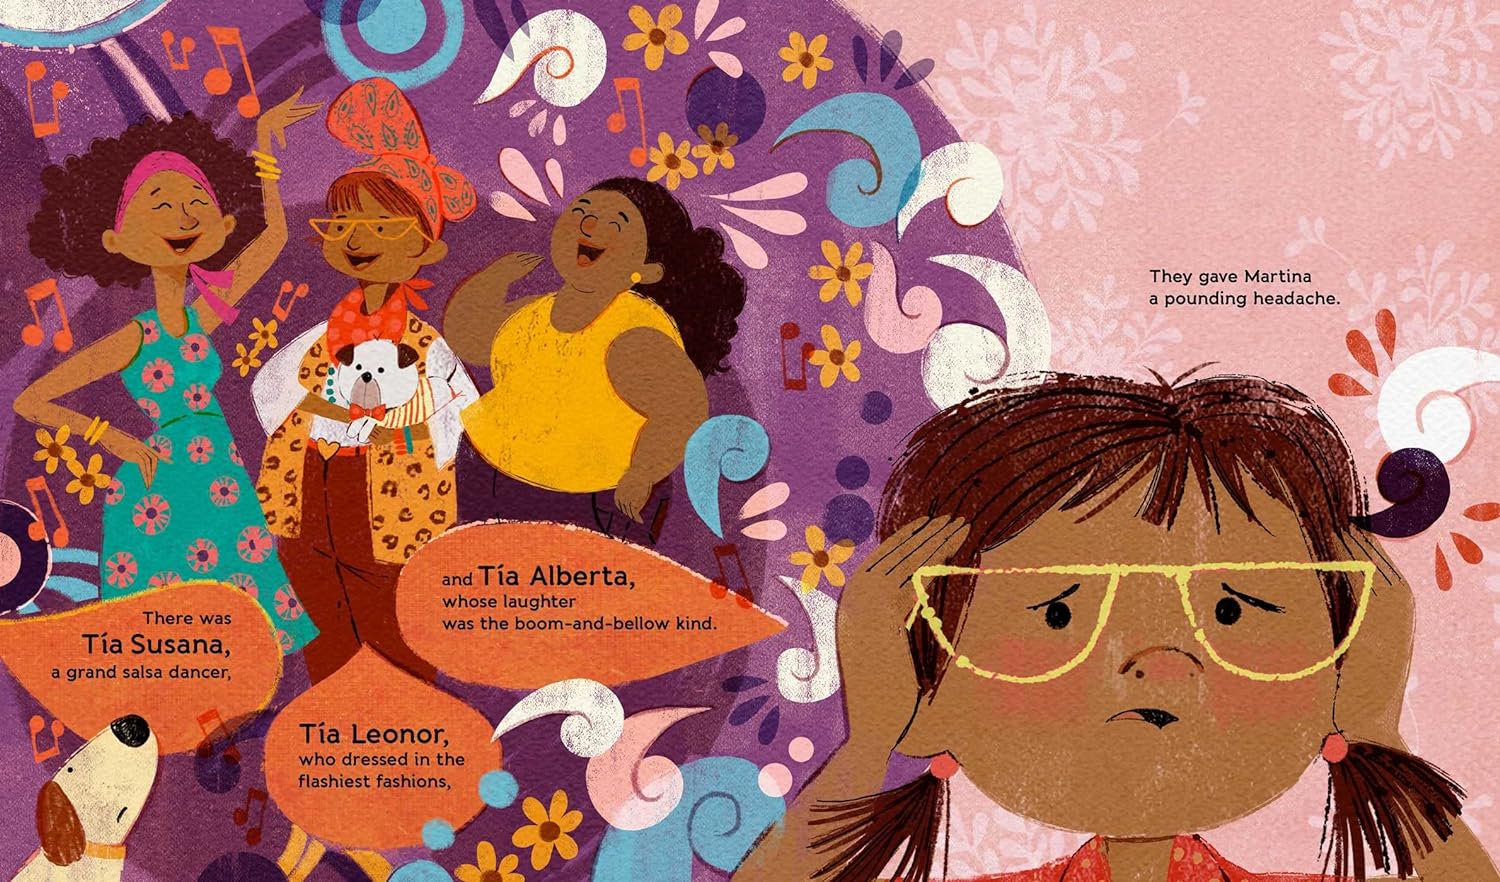 Martina Has Too Many Tías Hardcover – Picture Book